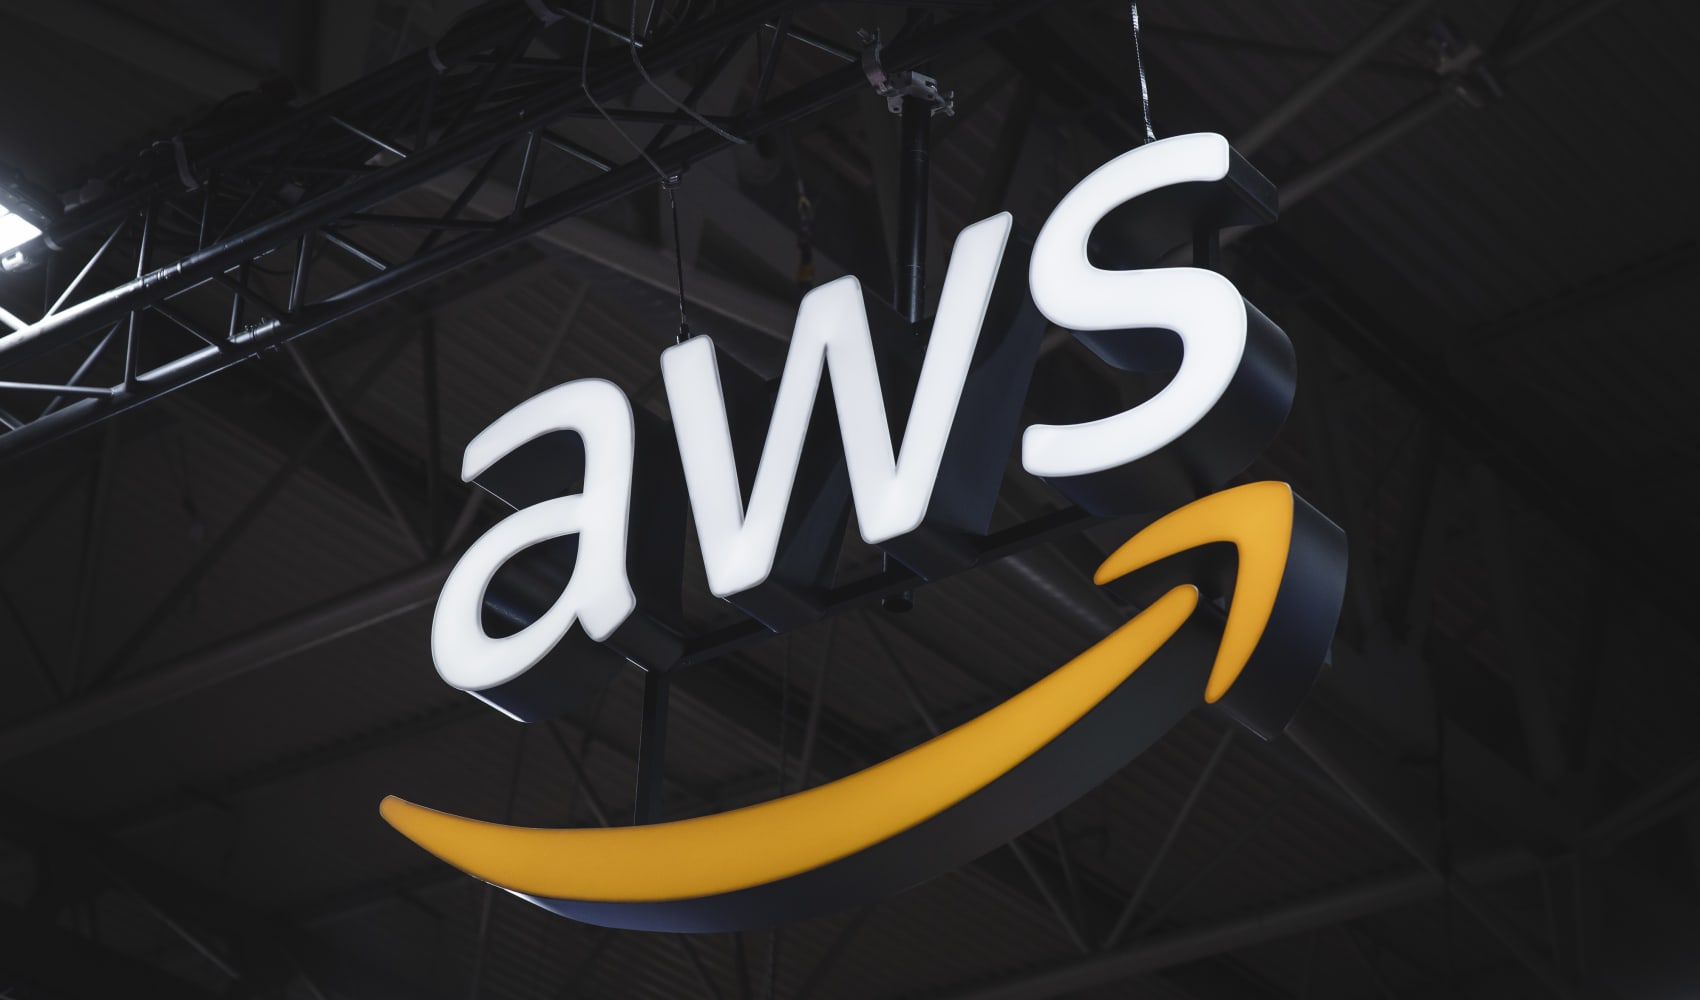 Amazon's AWS to invest nearly $9 billion in Singapore to grow cloud infrastructure